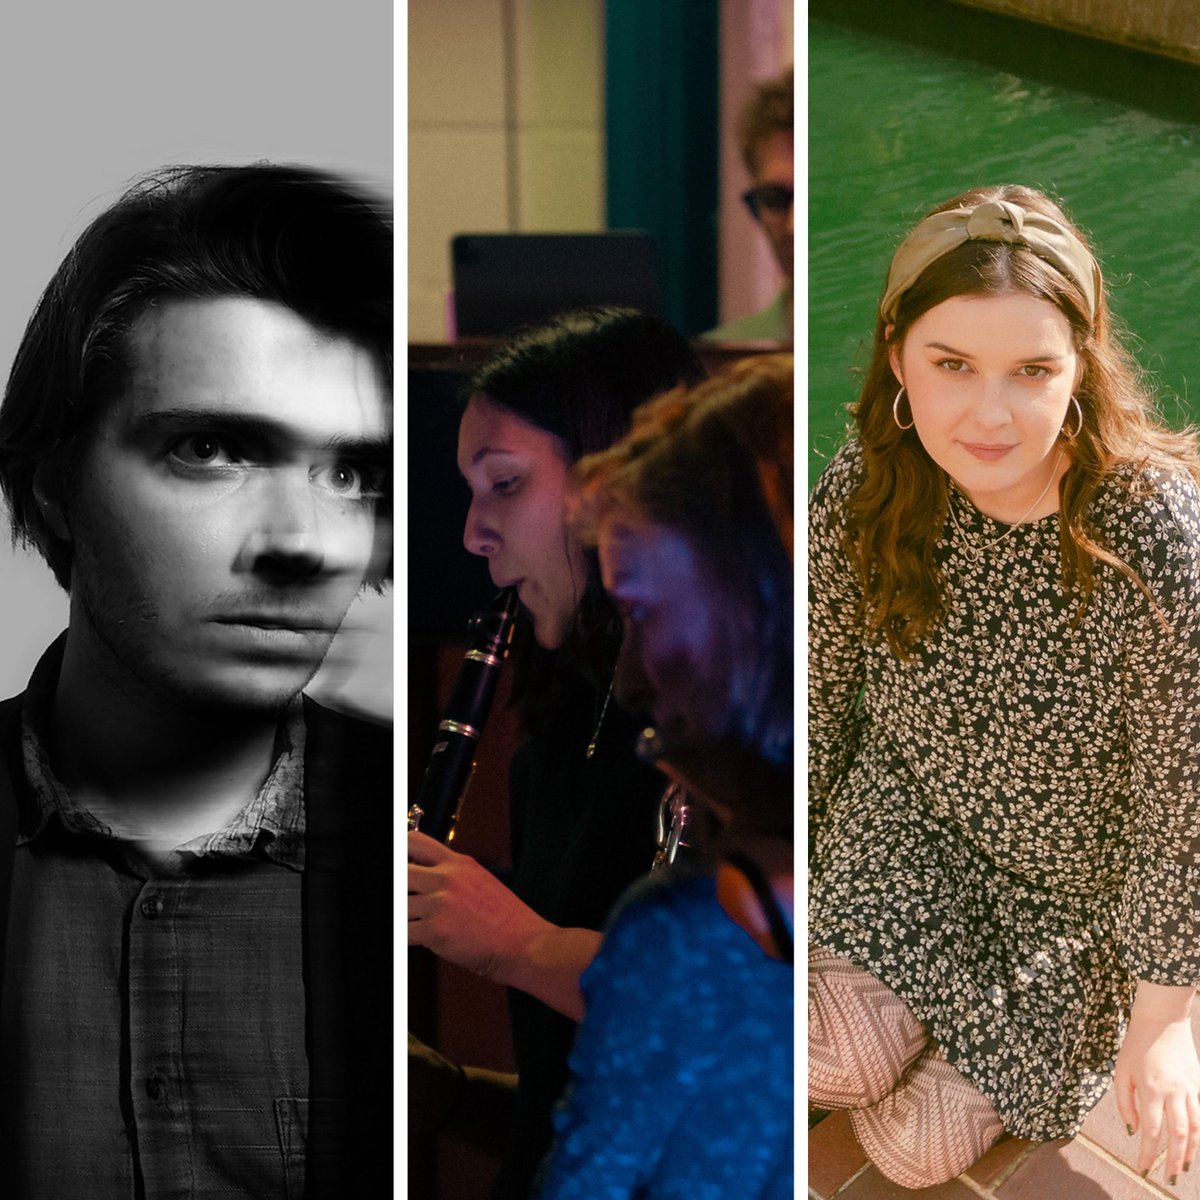 TONIGHT! @standard_issuex premiere two new works by composers Mathis Saunier @MthsSaunier and Anna Disley-Simpson @annadsmusic in London - learn more about Standard Issue on PRXLUDES: buff.ly/3Upbboo